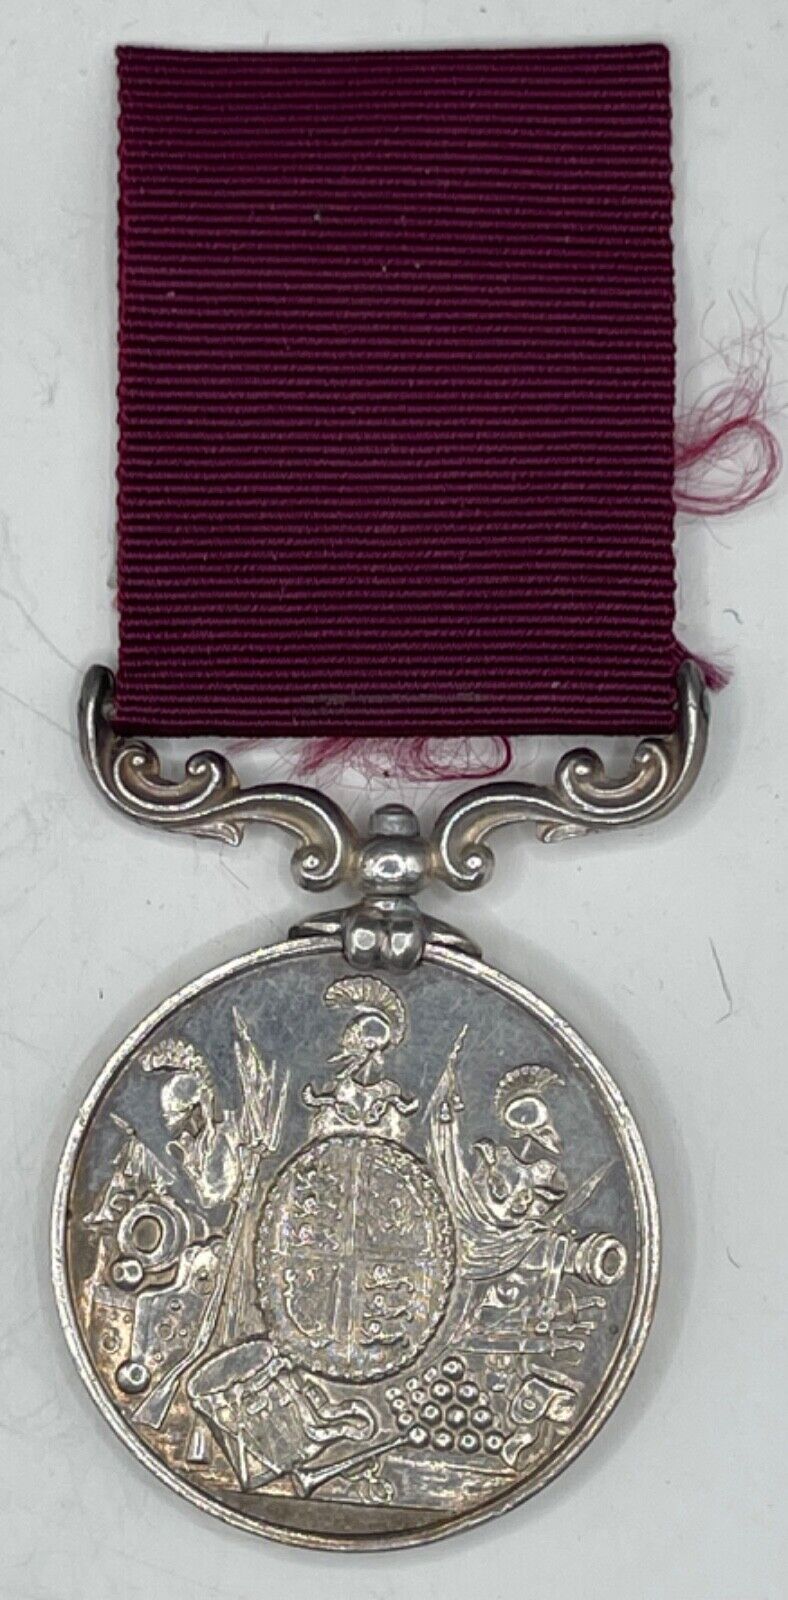 RARE ORIGINAL BRITISH ARMY LS&GC MEDAL OFFICIALLY IMPRESSED NAMED WARWICKSHIRE